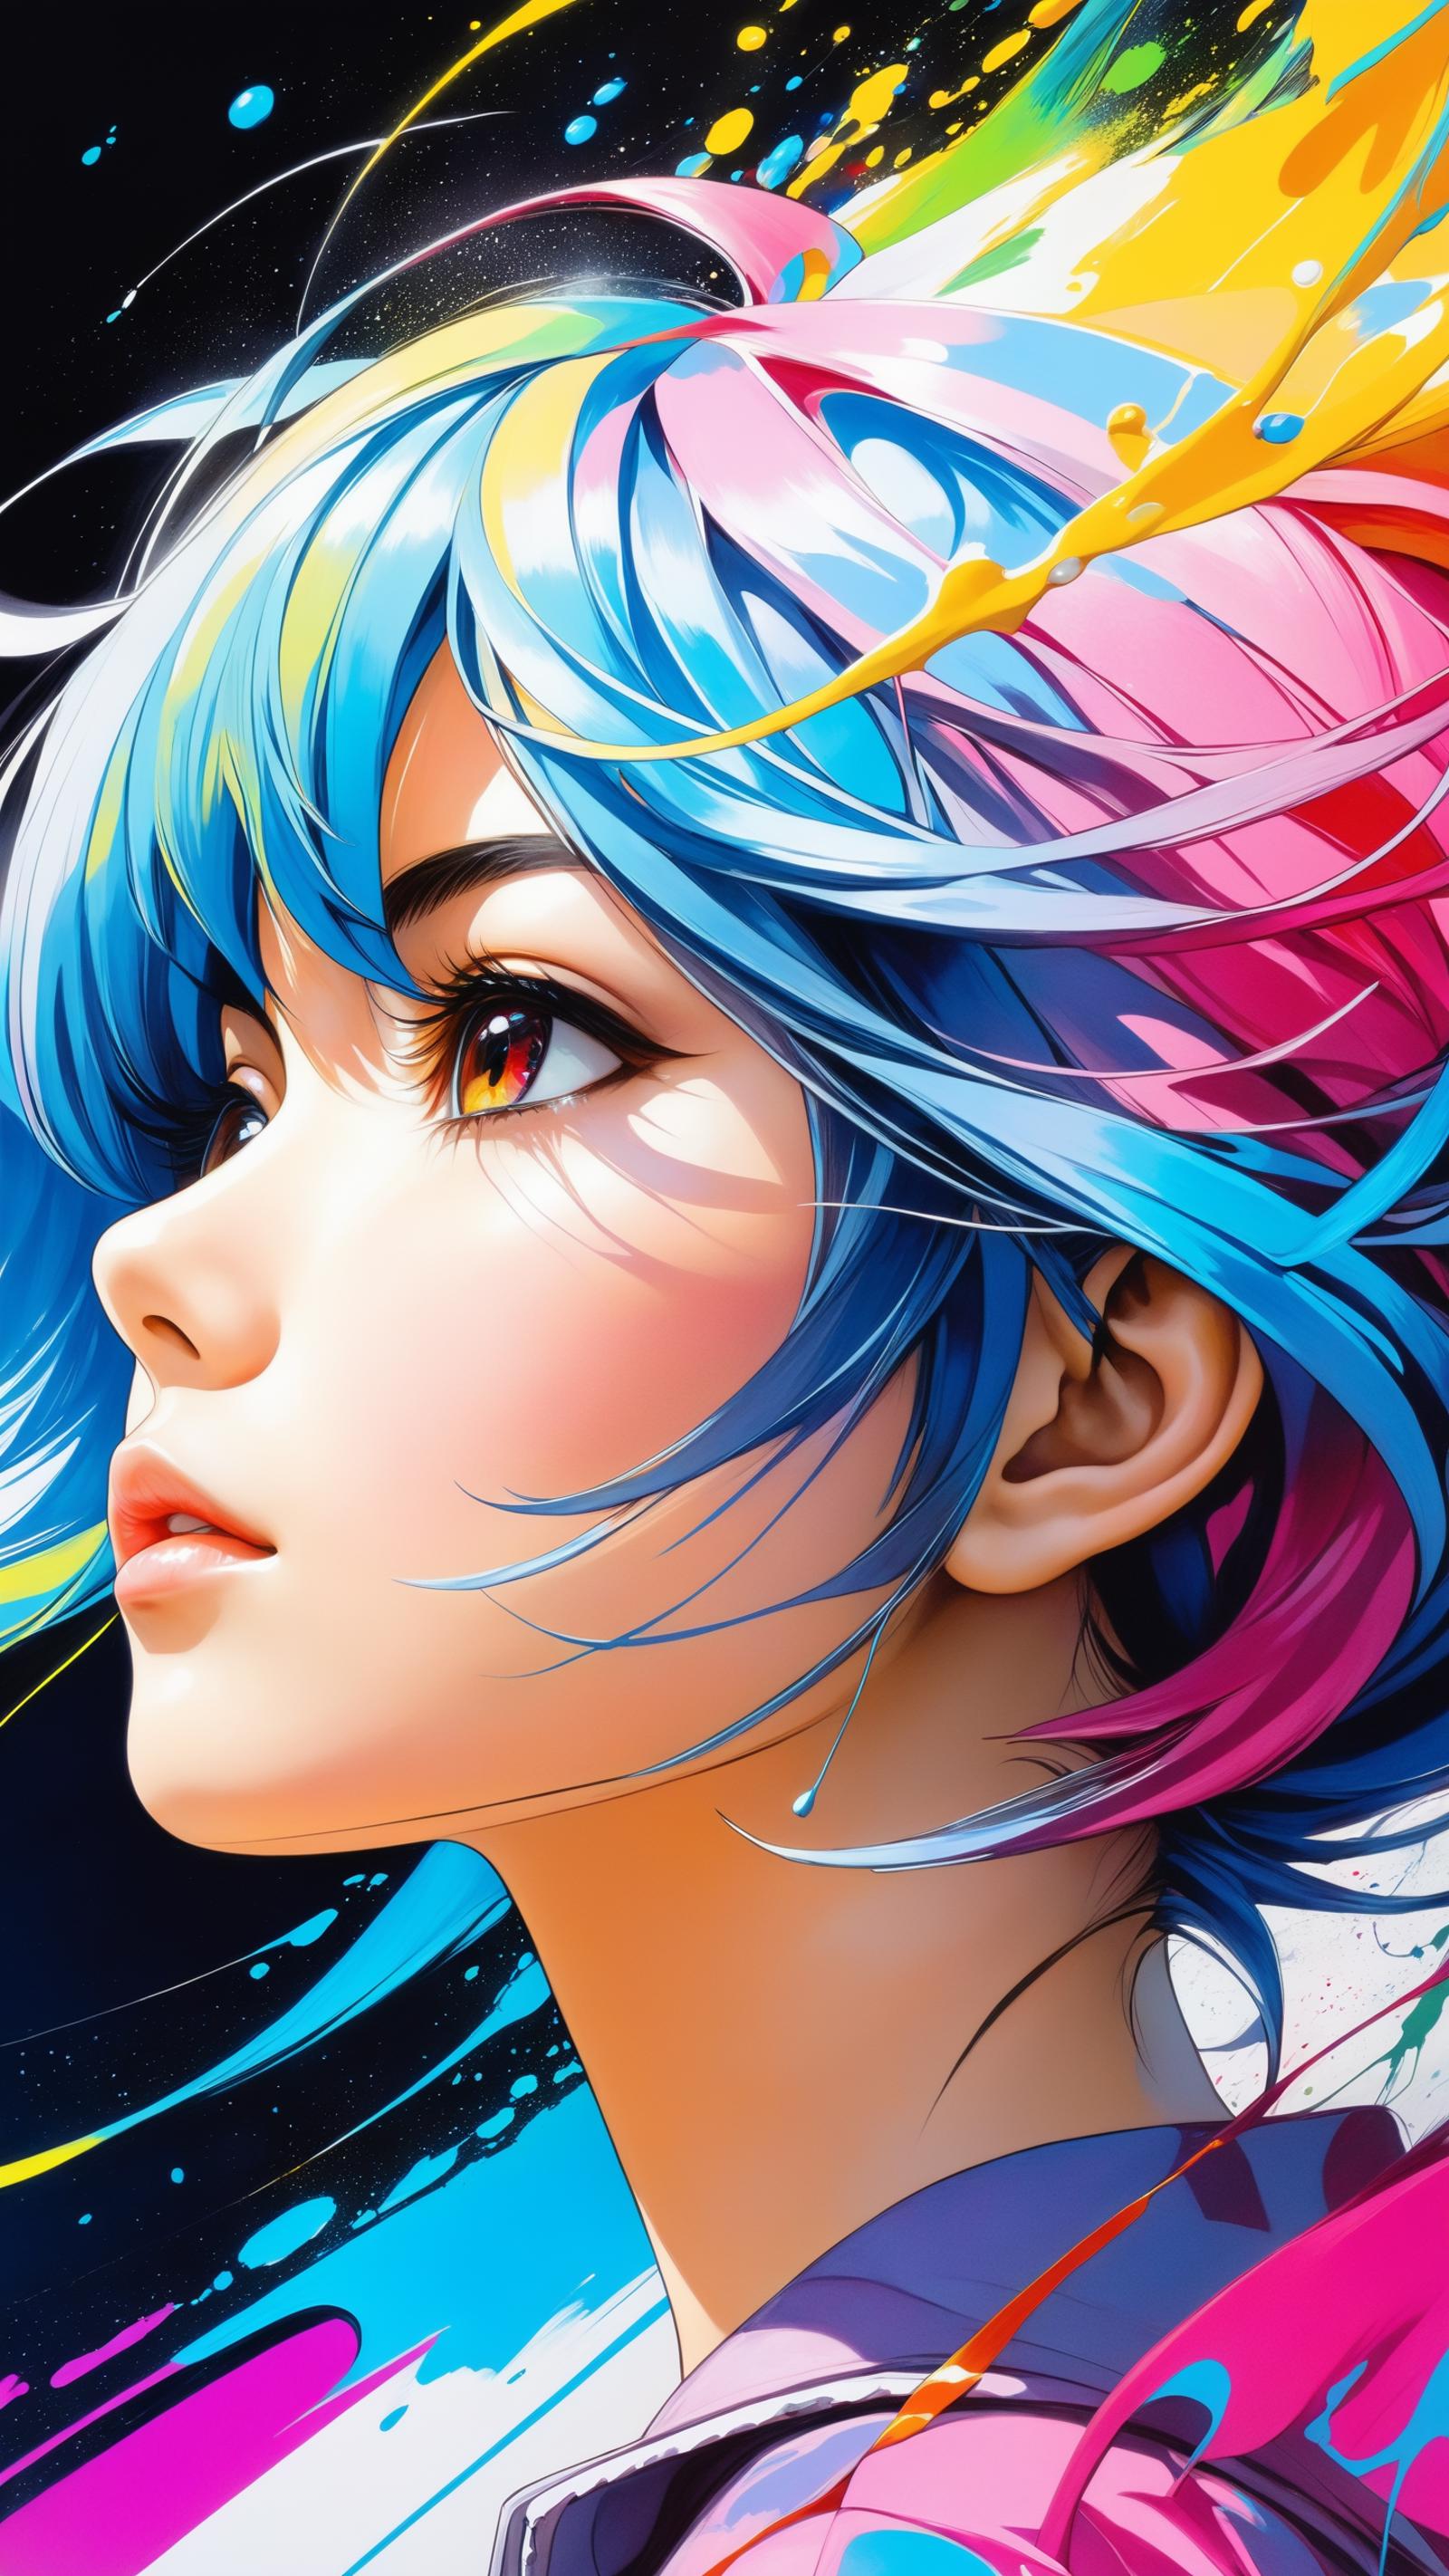 Anime-style digital art of a young woman with blue hair, red eyes, and pink tips.